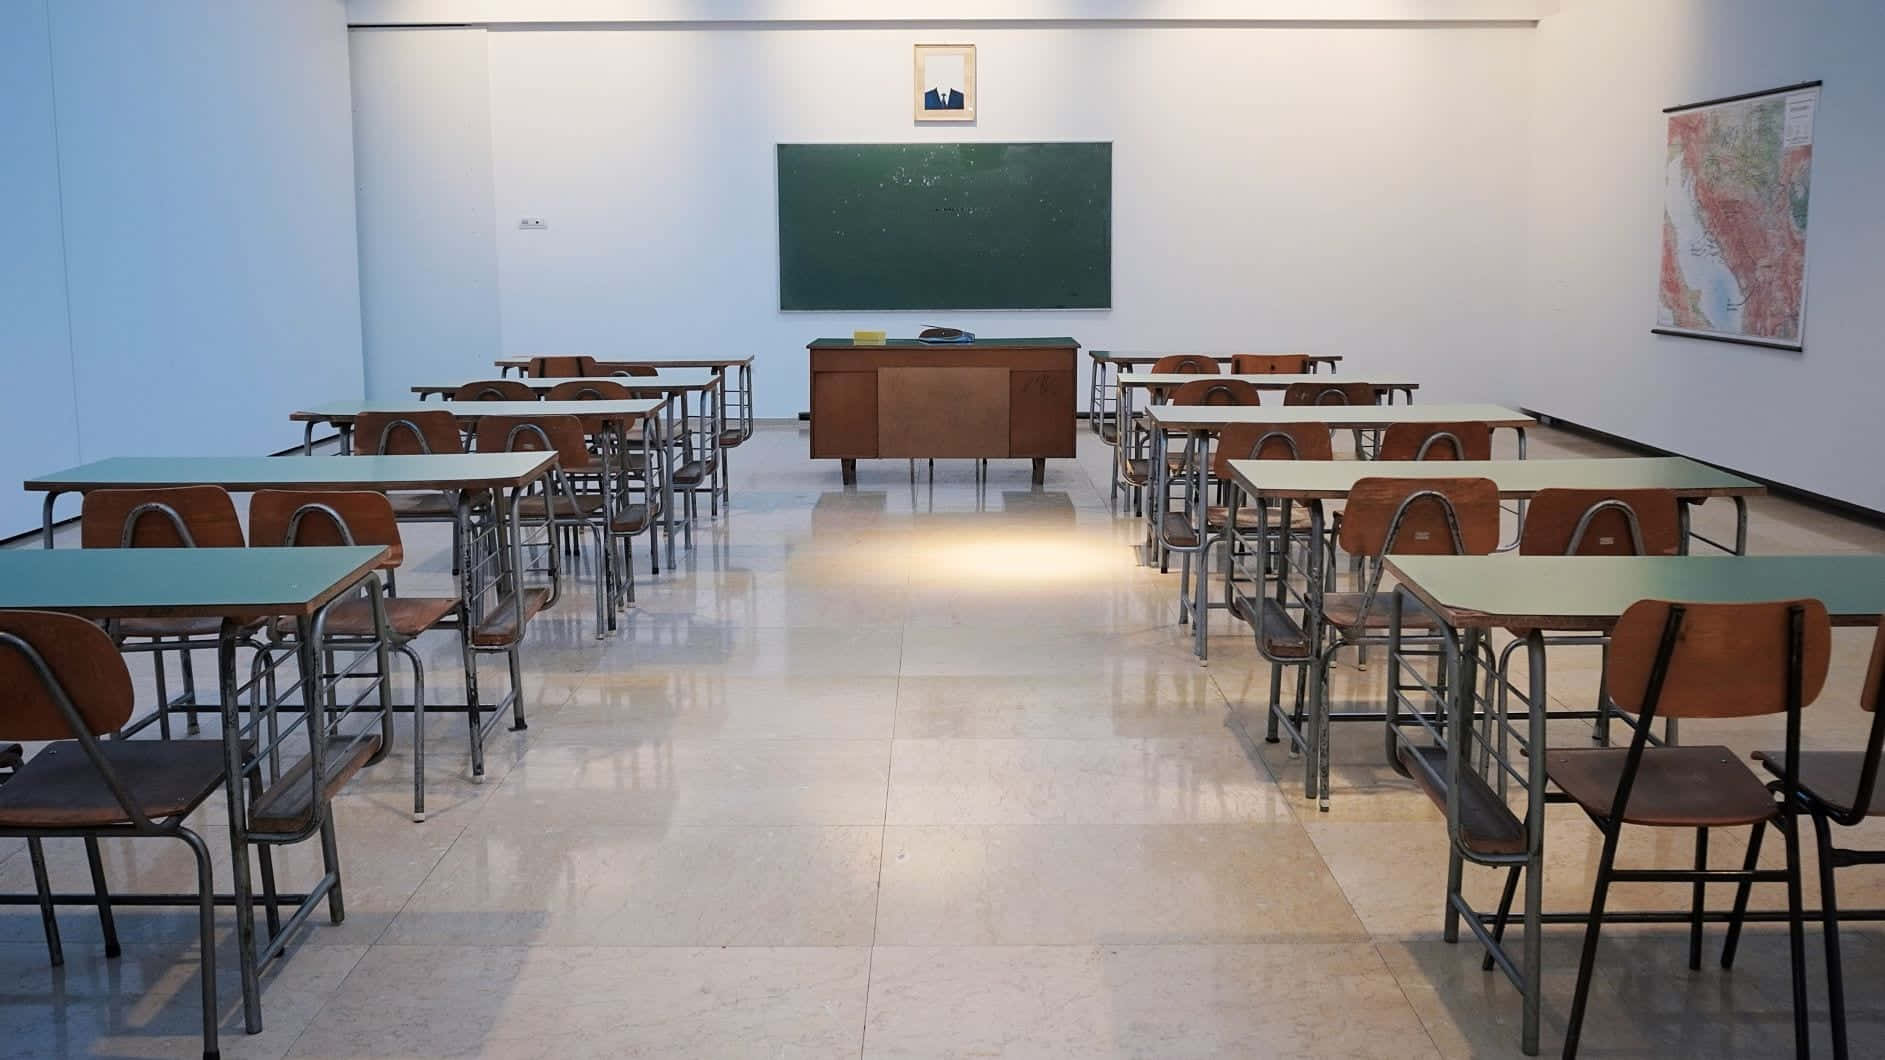 A Classroom With Desks And A Chalkboard